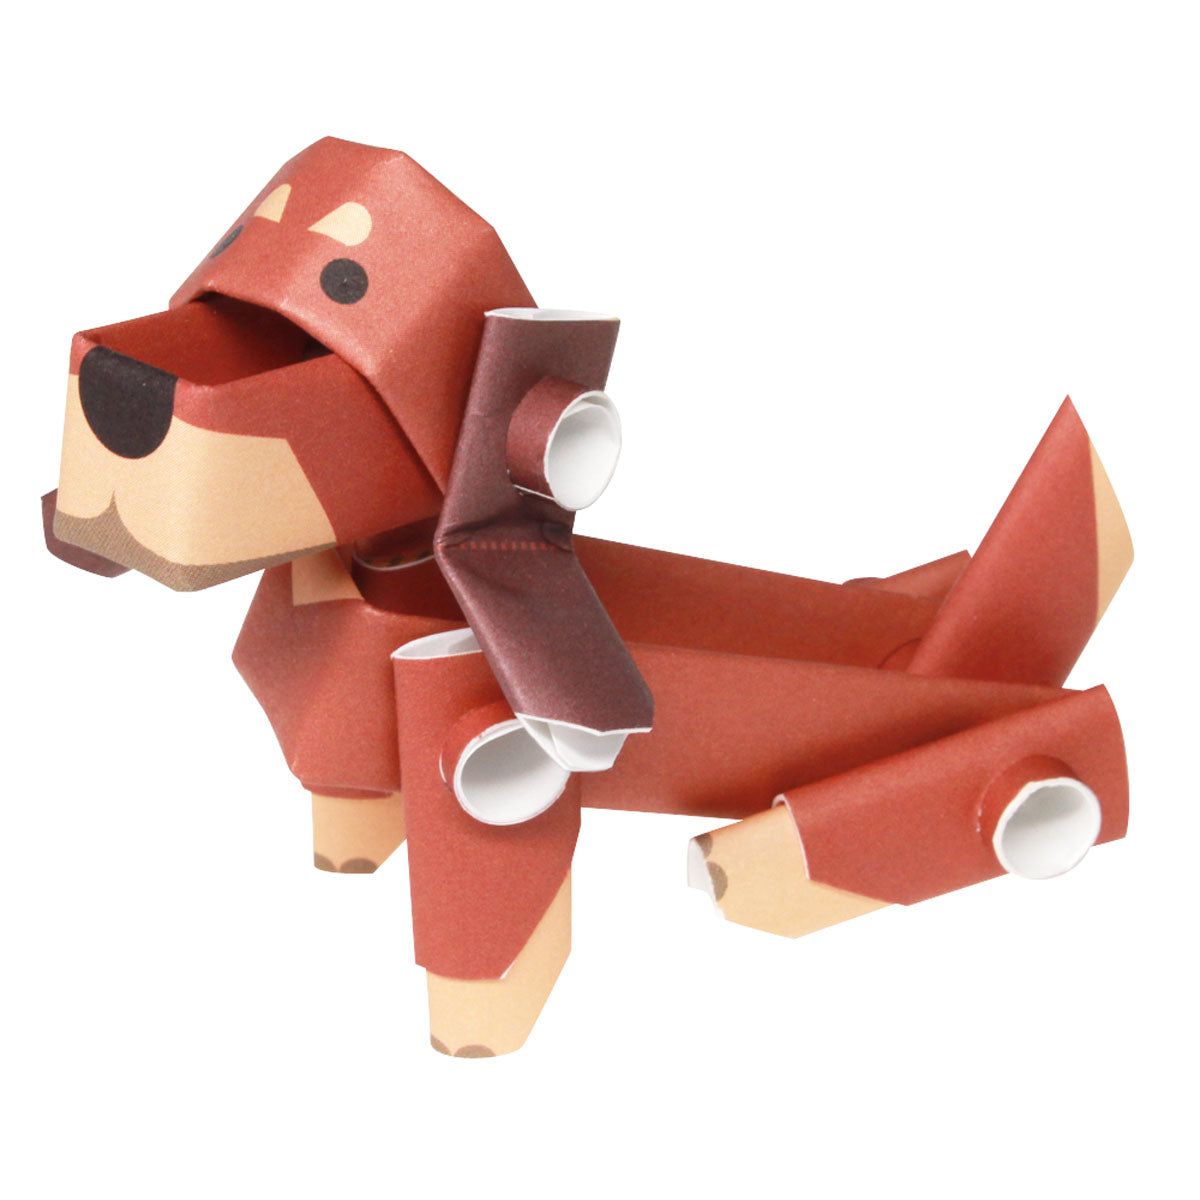 Dachshund origami paper art from make your kit from Piperoid